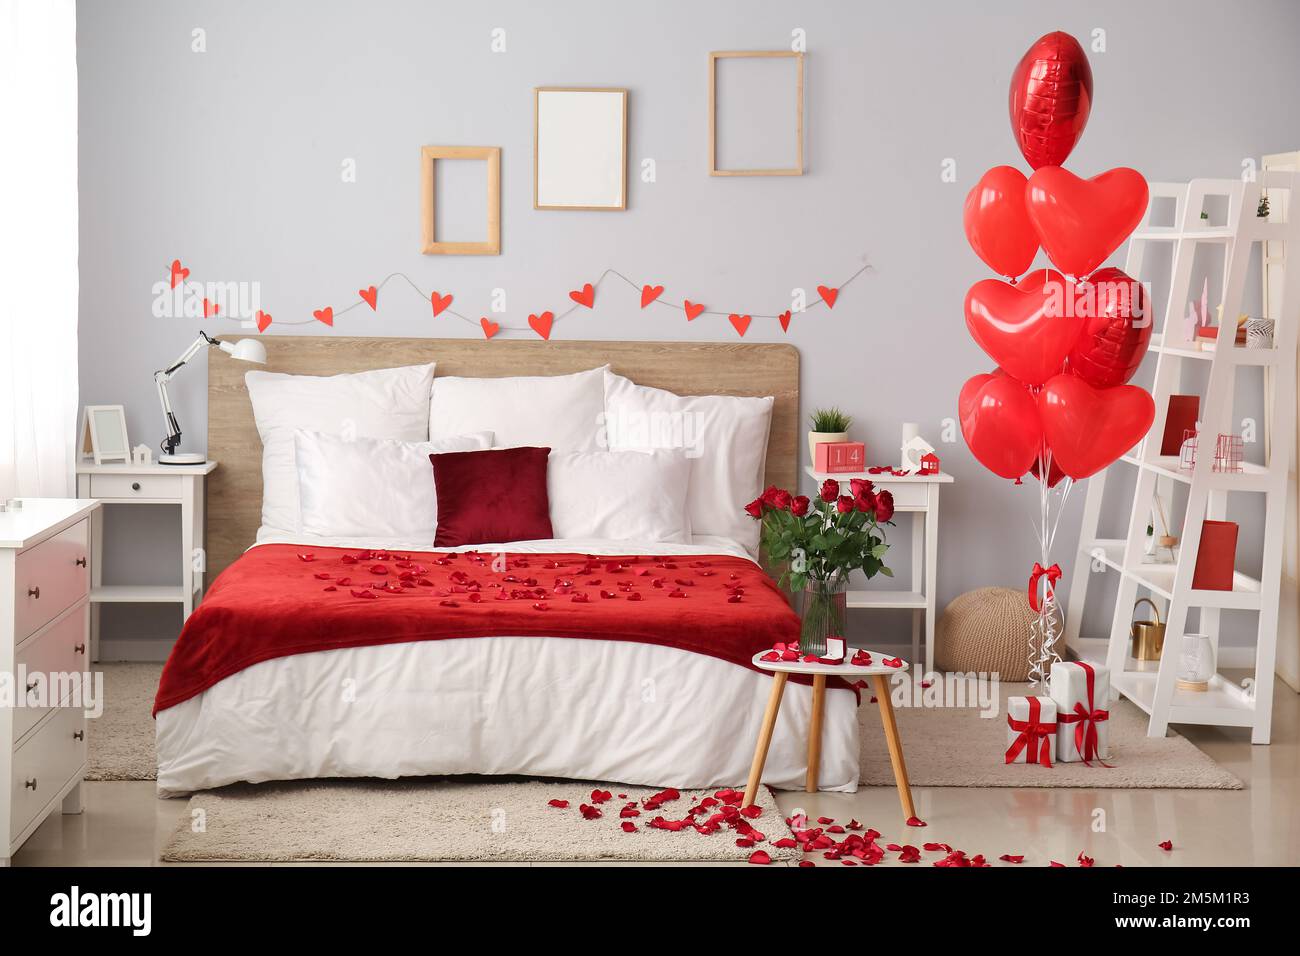 Interior of bedroom decorated for Valentine\'s Day with roses ...